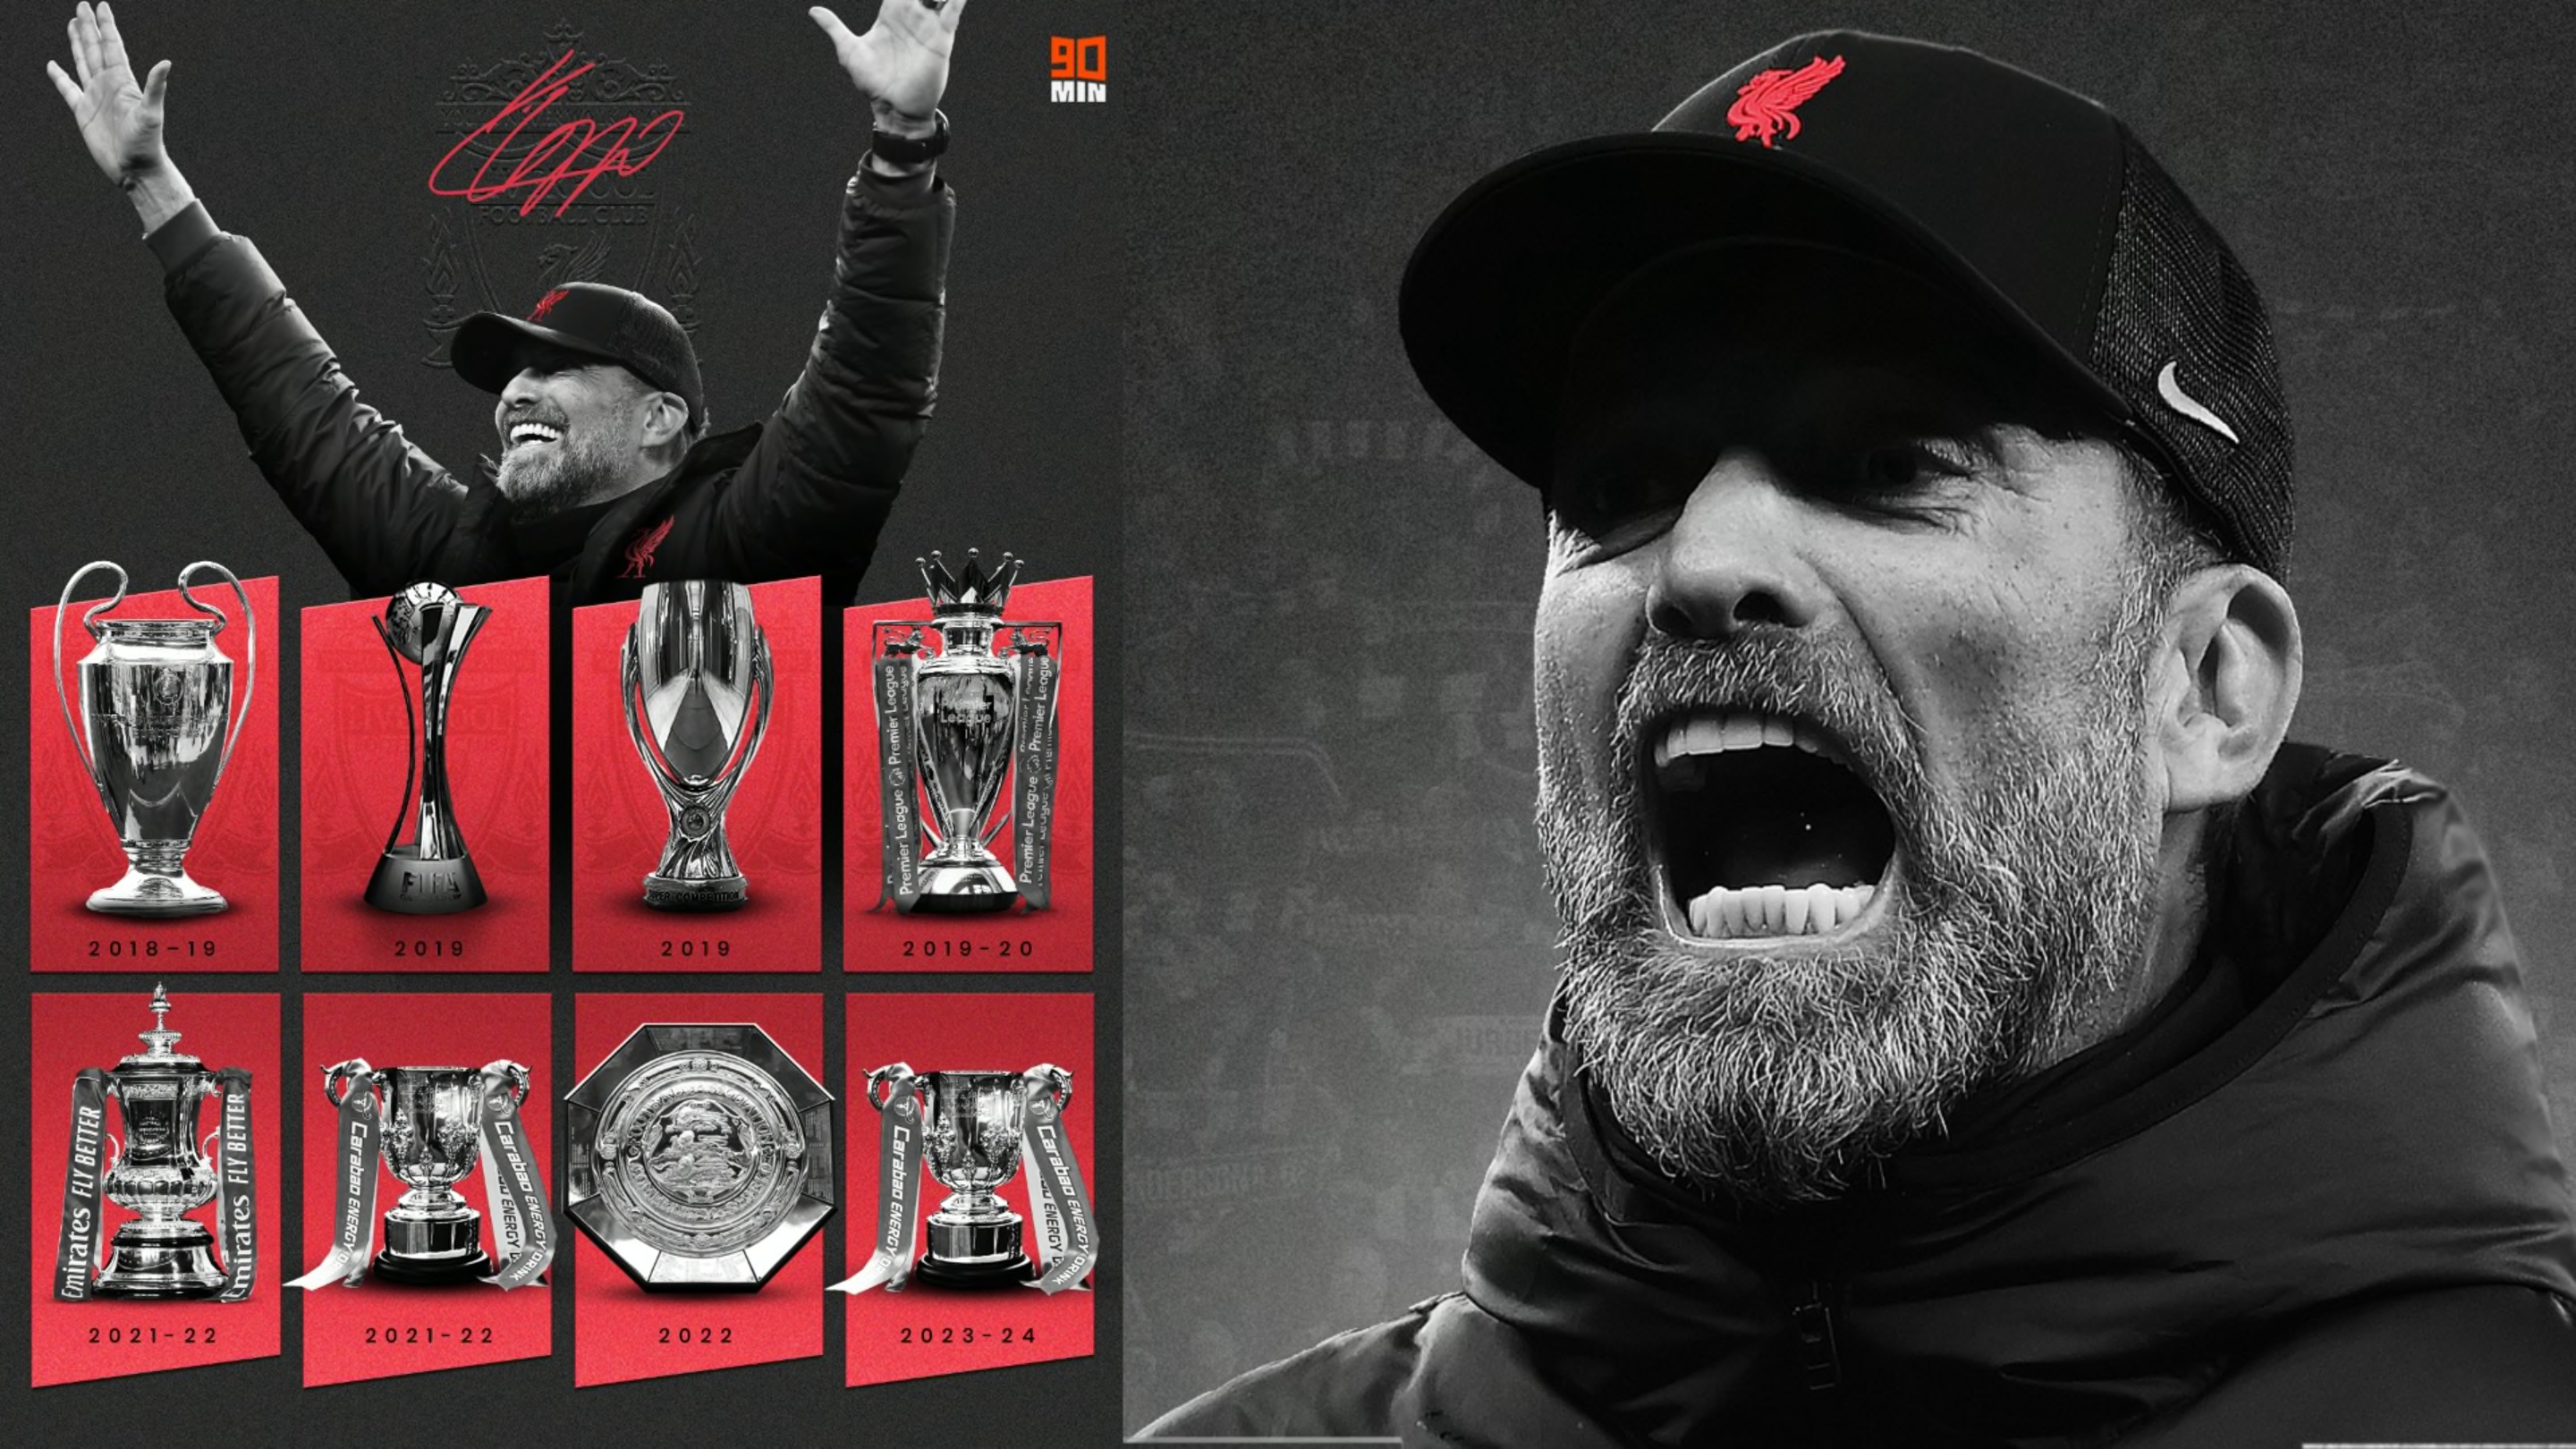 Farewell to Jurgen Klopp - the manager Liverpool may find it impossible to replace